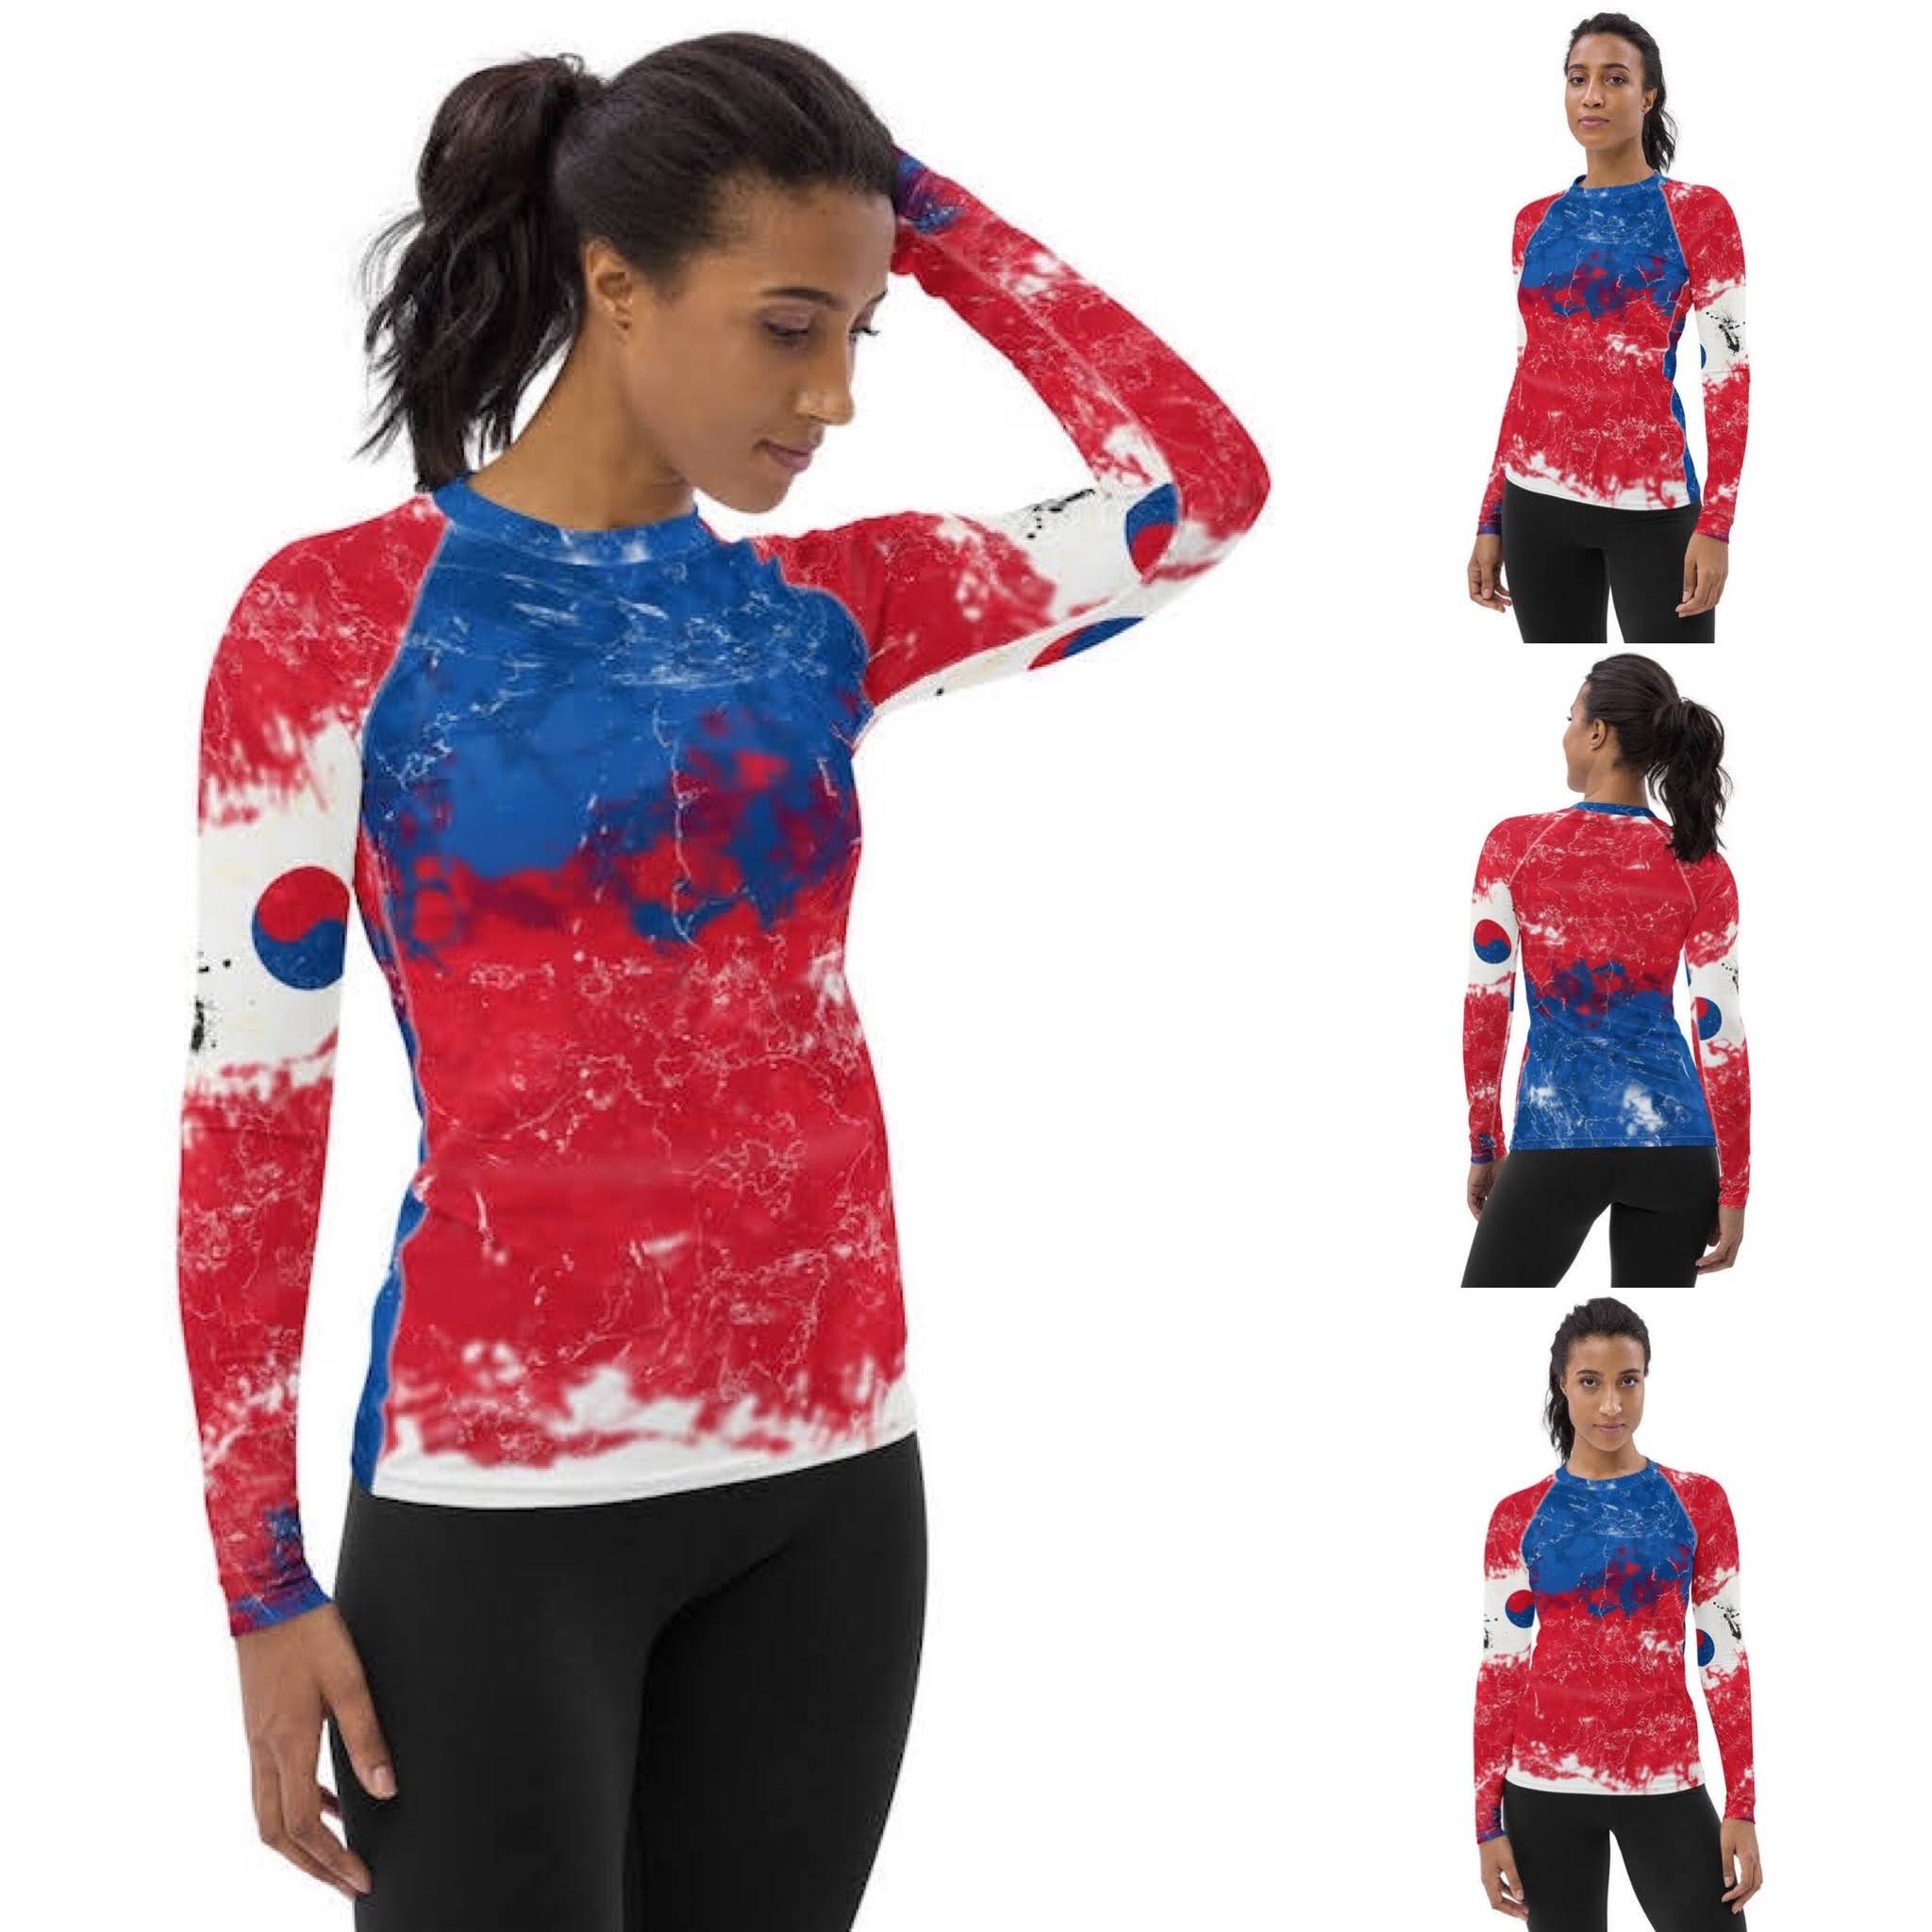 I really want these volleyball workout outfits to stand out in a crowd.
Many of the designs...feature the principal colors of a country's flag